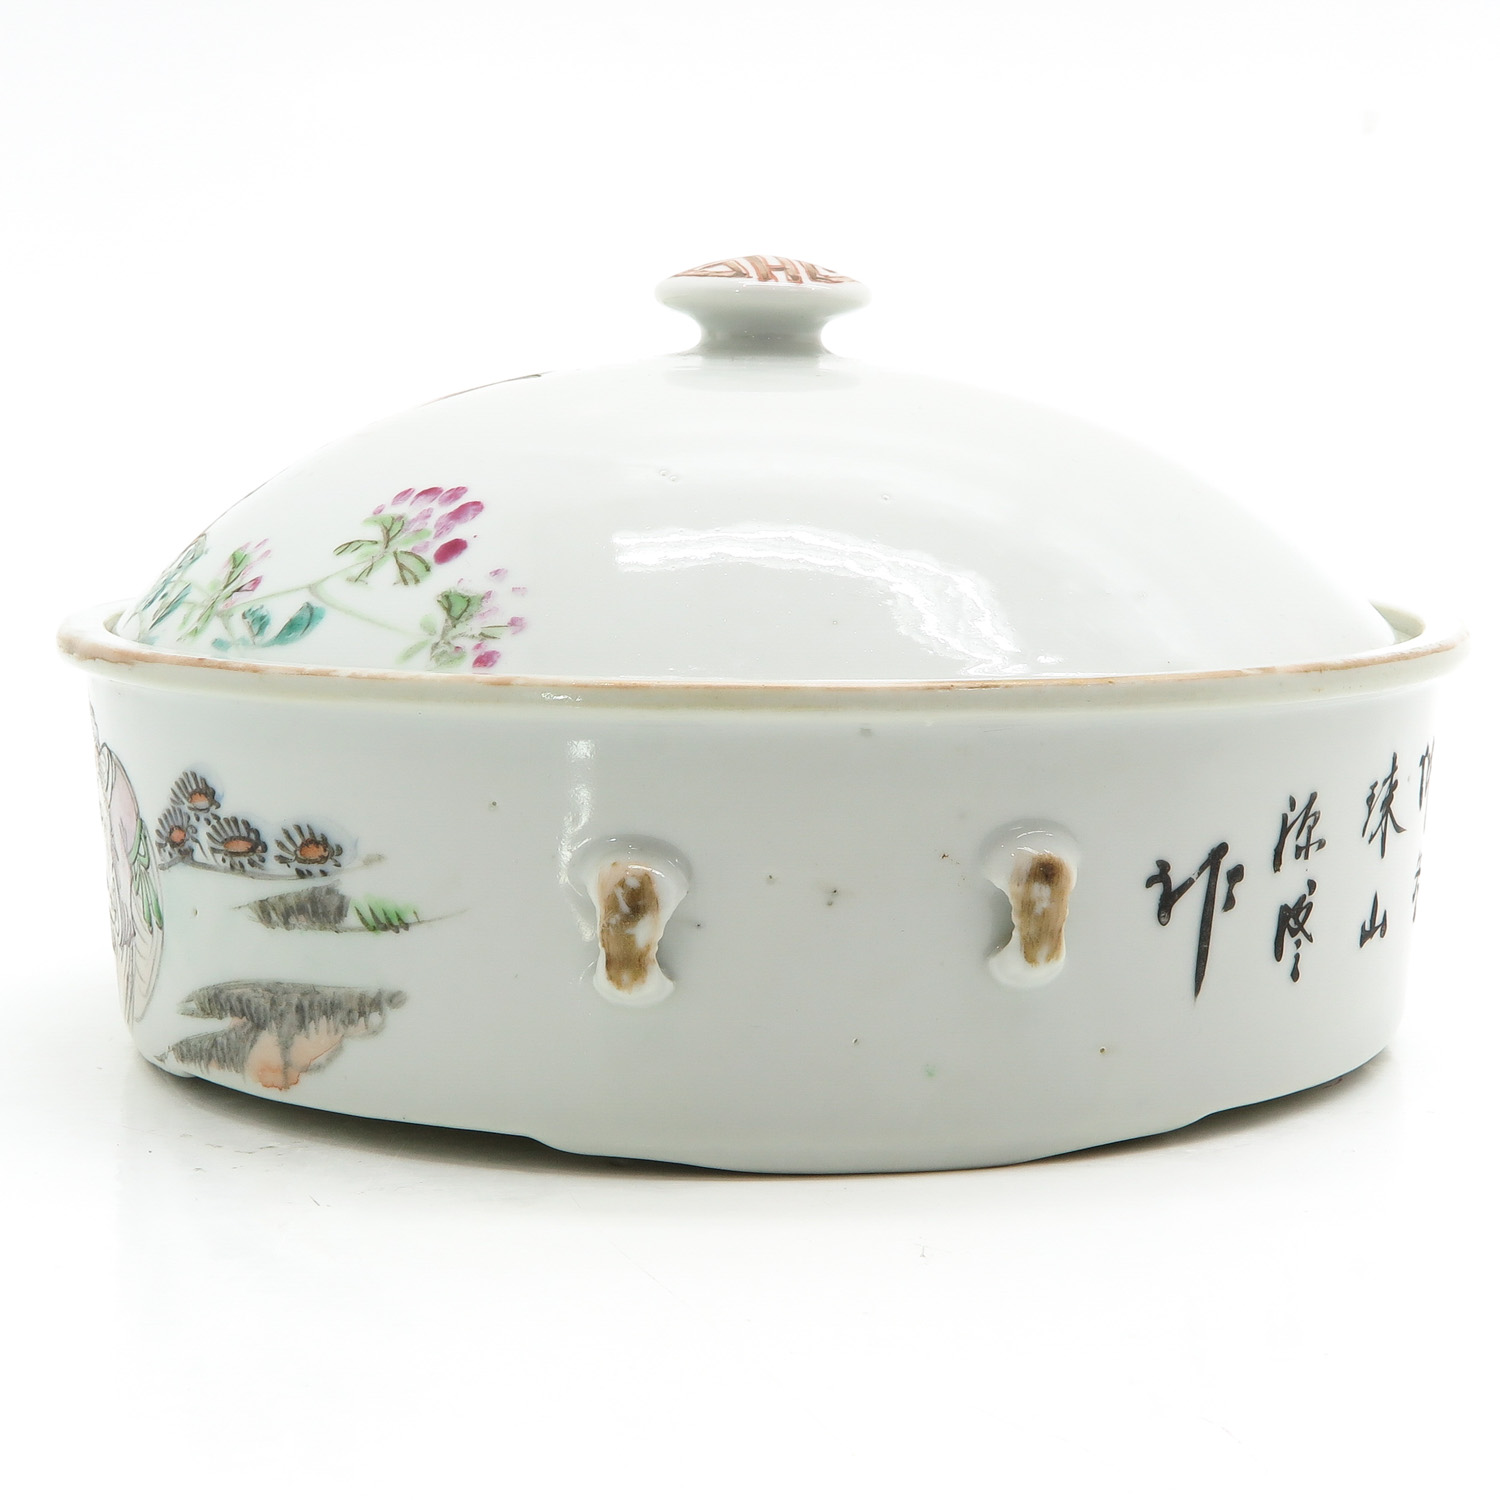 A Serving Dish with Cover - Image 2 of 9